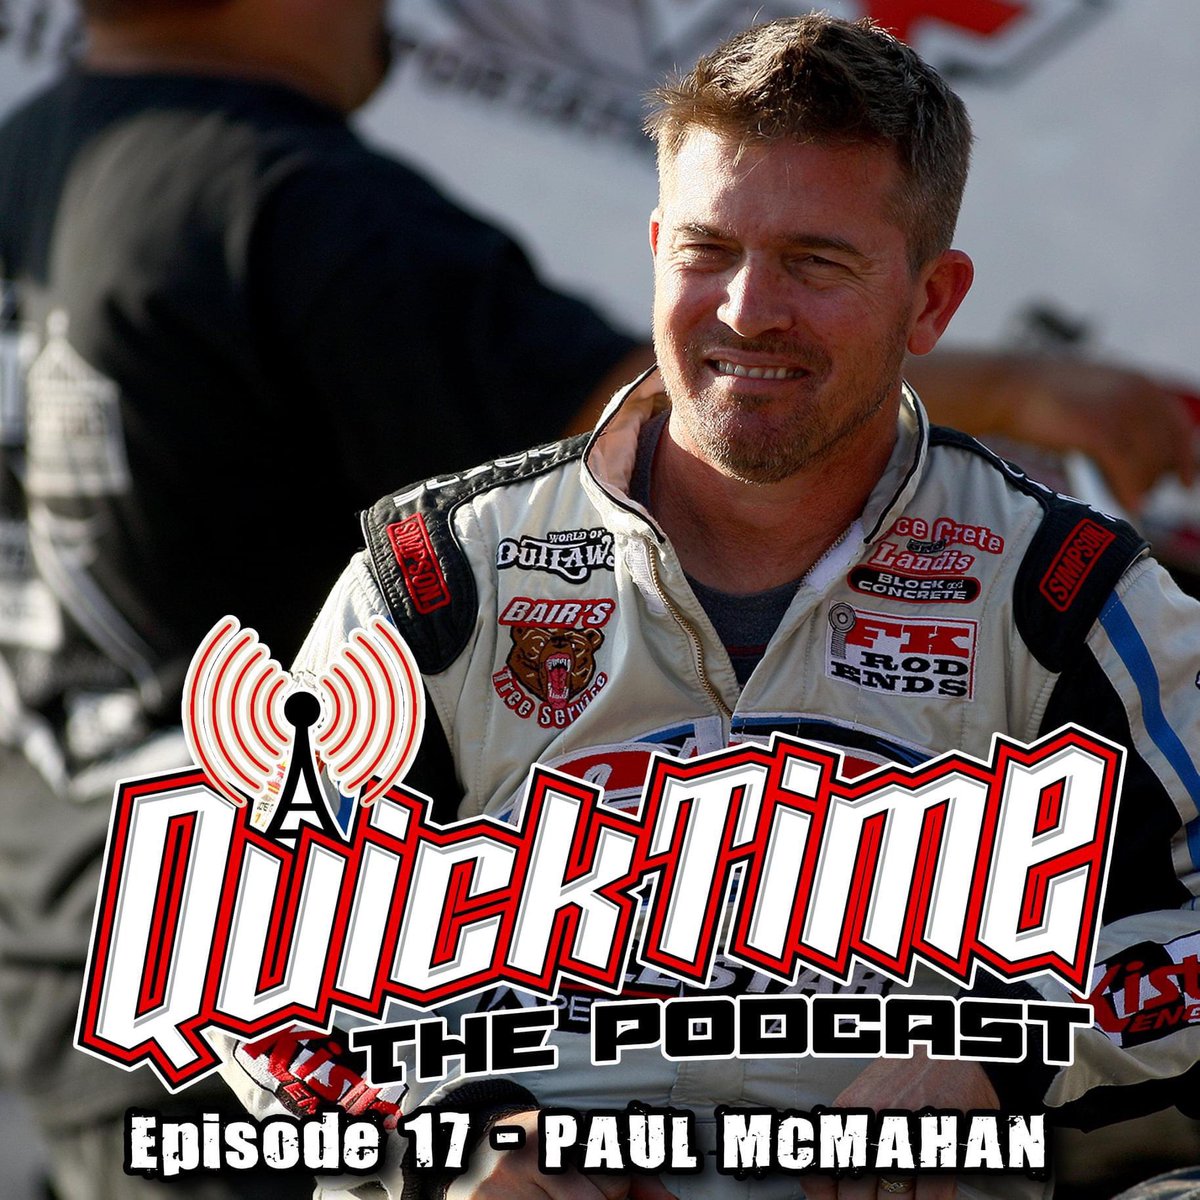 A little late getting this out there but another great @Quicktimepod with @RealPaulMcMahan .  Paul talked about his retun to Bristol Motor Speedway and his return to the @CJB_51 team.  Check it out wherever you get your podcasts. https://t.co/ncQ94A6r0n